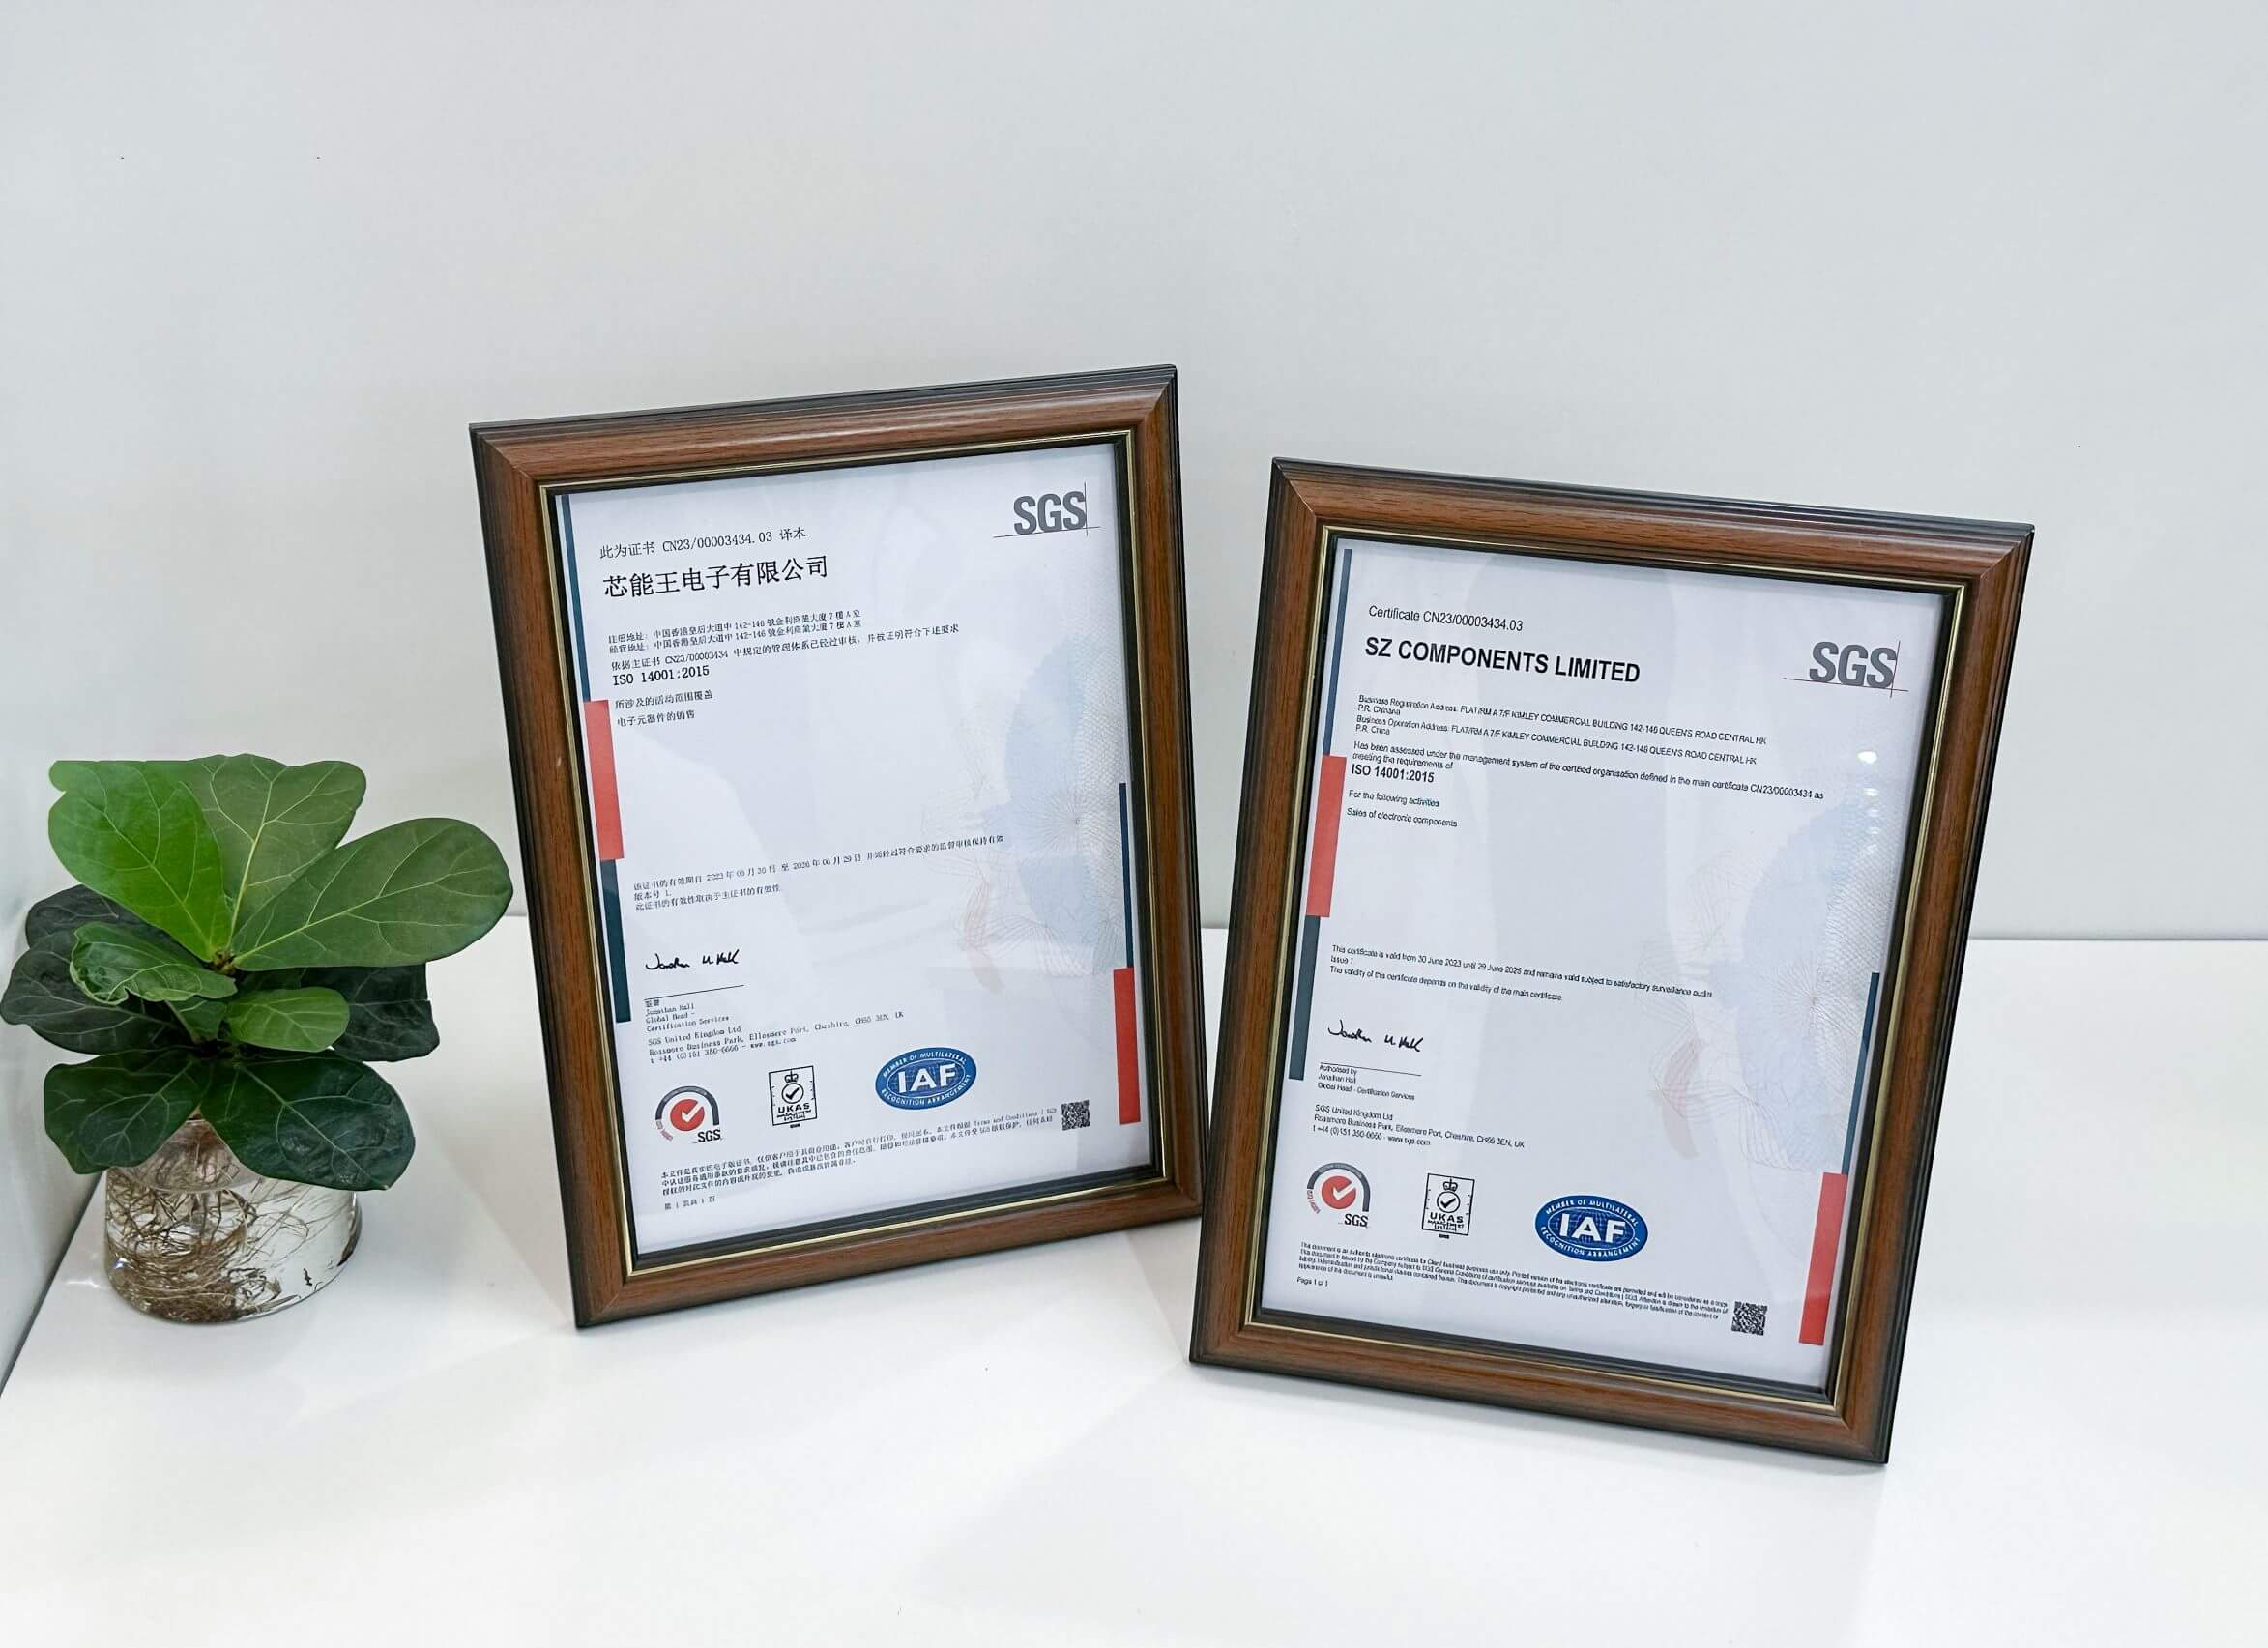 SZ COMPONENTS LIMITED Achieves ISO 14001:2015 Certification, Reinforces Commitment to Sustainability